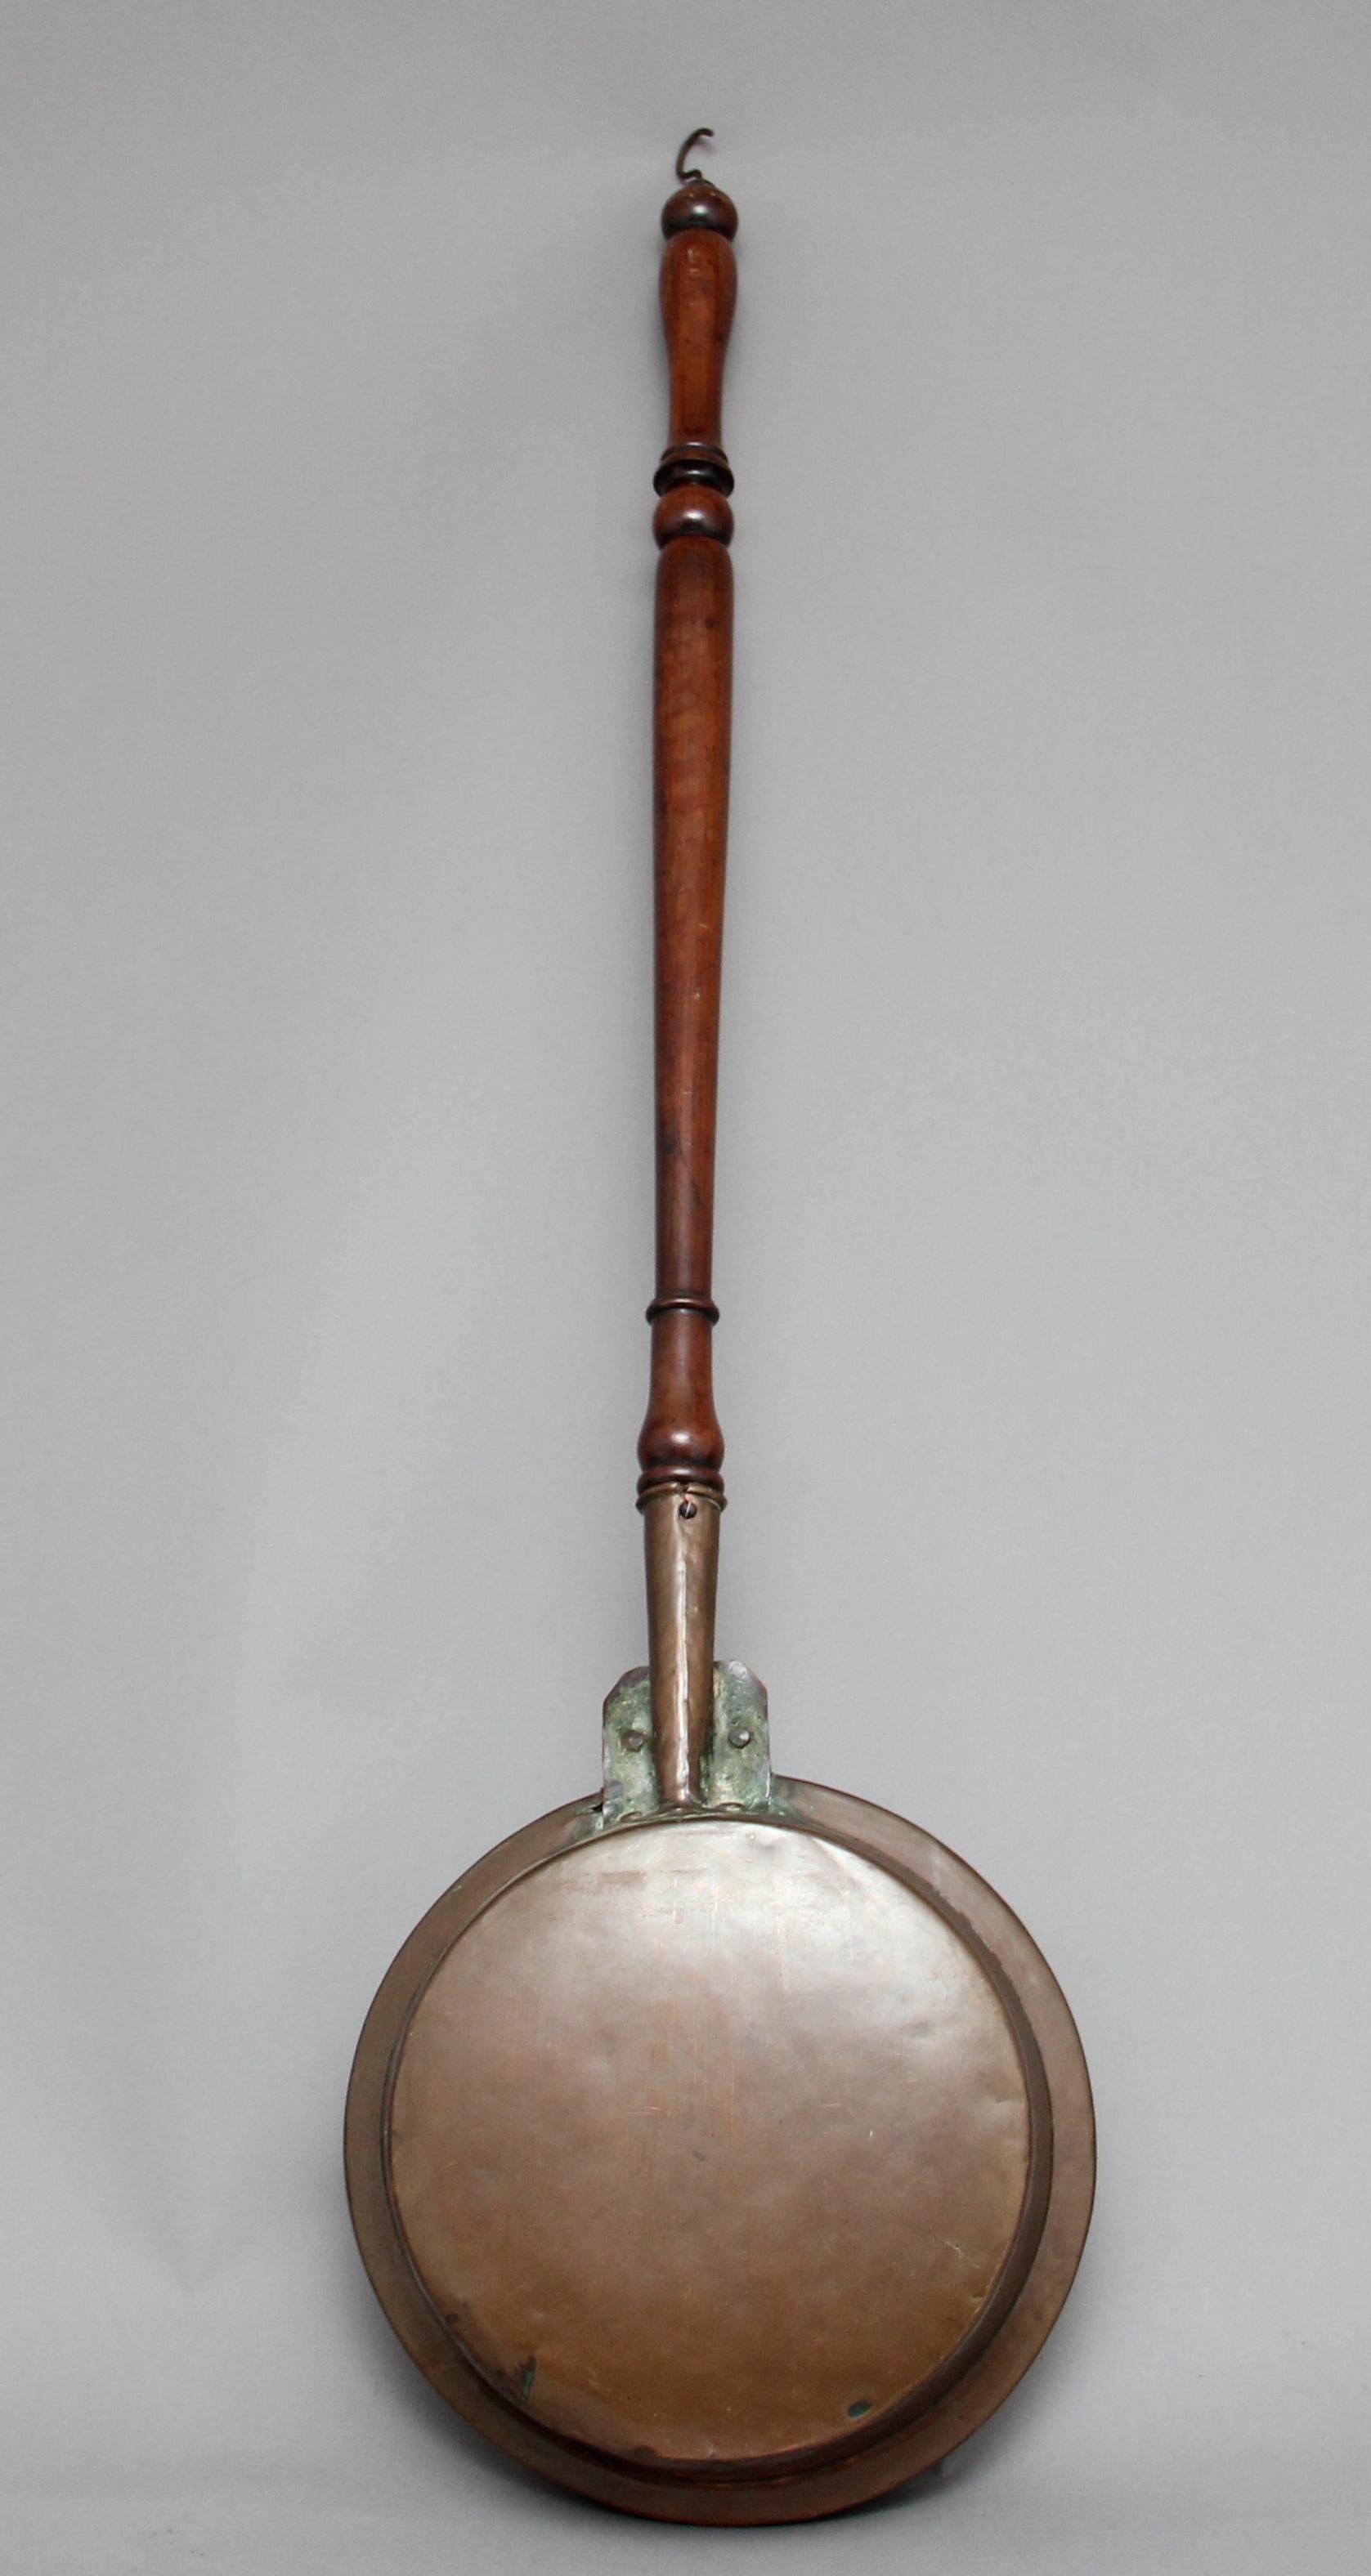 19th century copper bed warming pan with pierced and engraved decoration and a turned mahogany handle with brass hook, circa 1860.
 